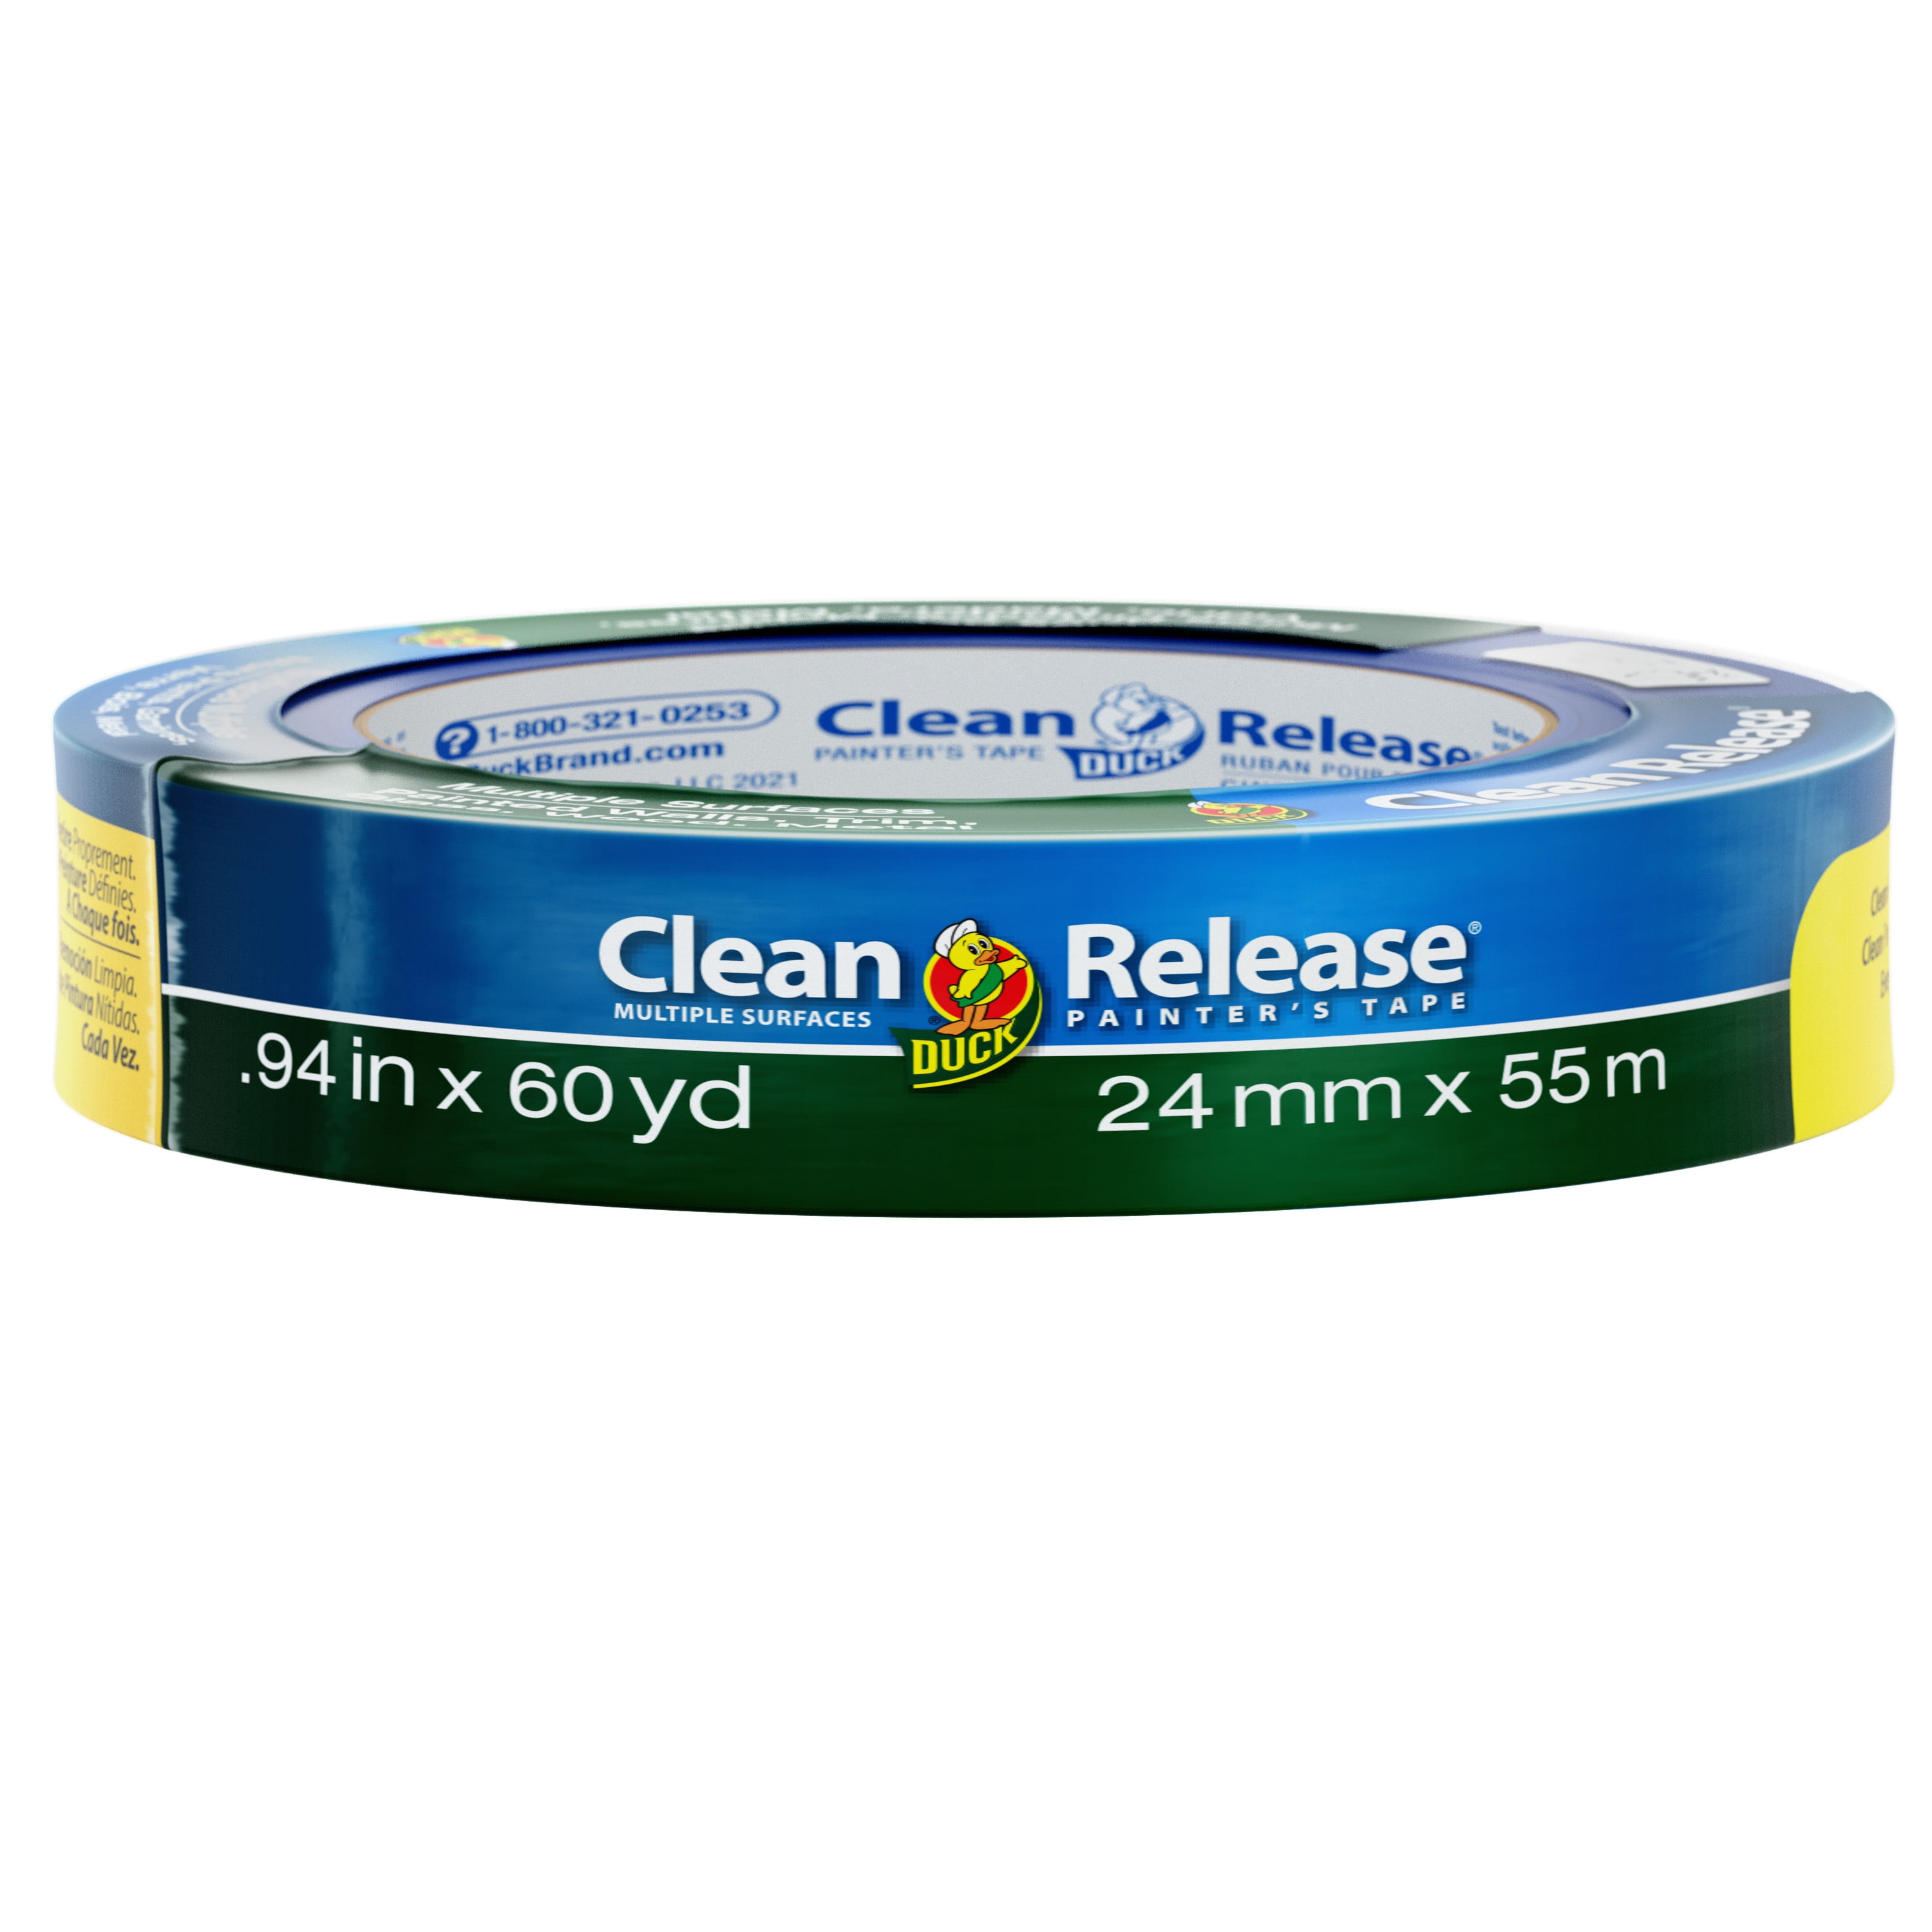 Blue Paint Tape 65 Yards 195 feet 1" Leaves Zero Adhesive Residue UP TO 25% OFF 